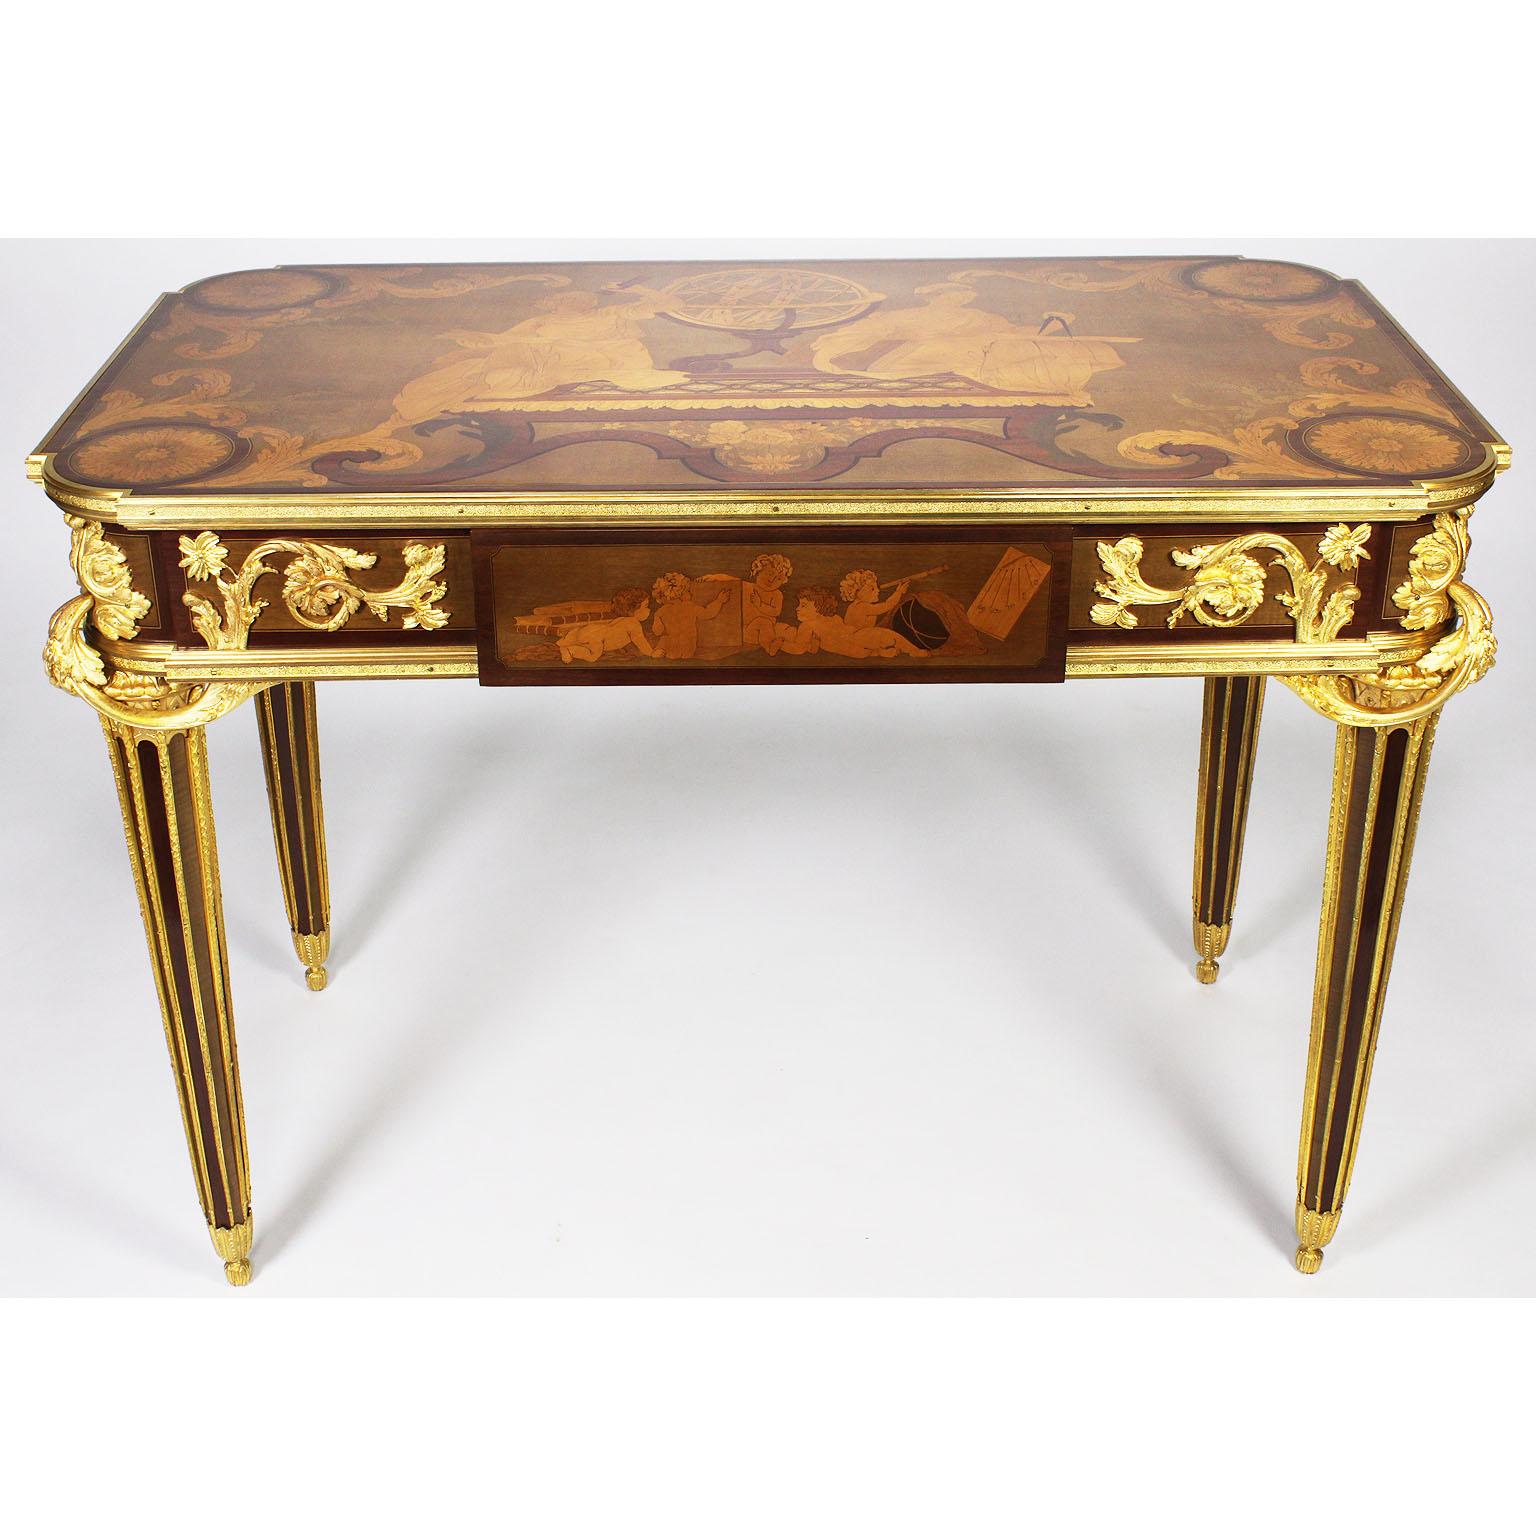 A very fine French 19th century Louis XVI style ormolu-mounted Kingwood and Bois Citronnier Marquetry center table or writing table, attributed to Alfred Emmanuel Louis Beurdeley (French, 1847-1919), after the model by Jean-Henri Riesener (French,